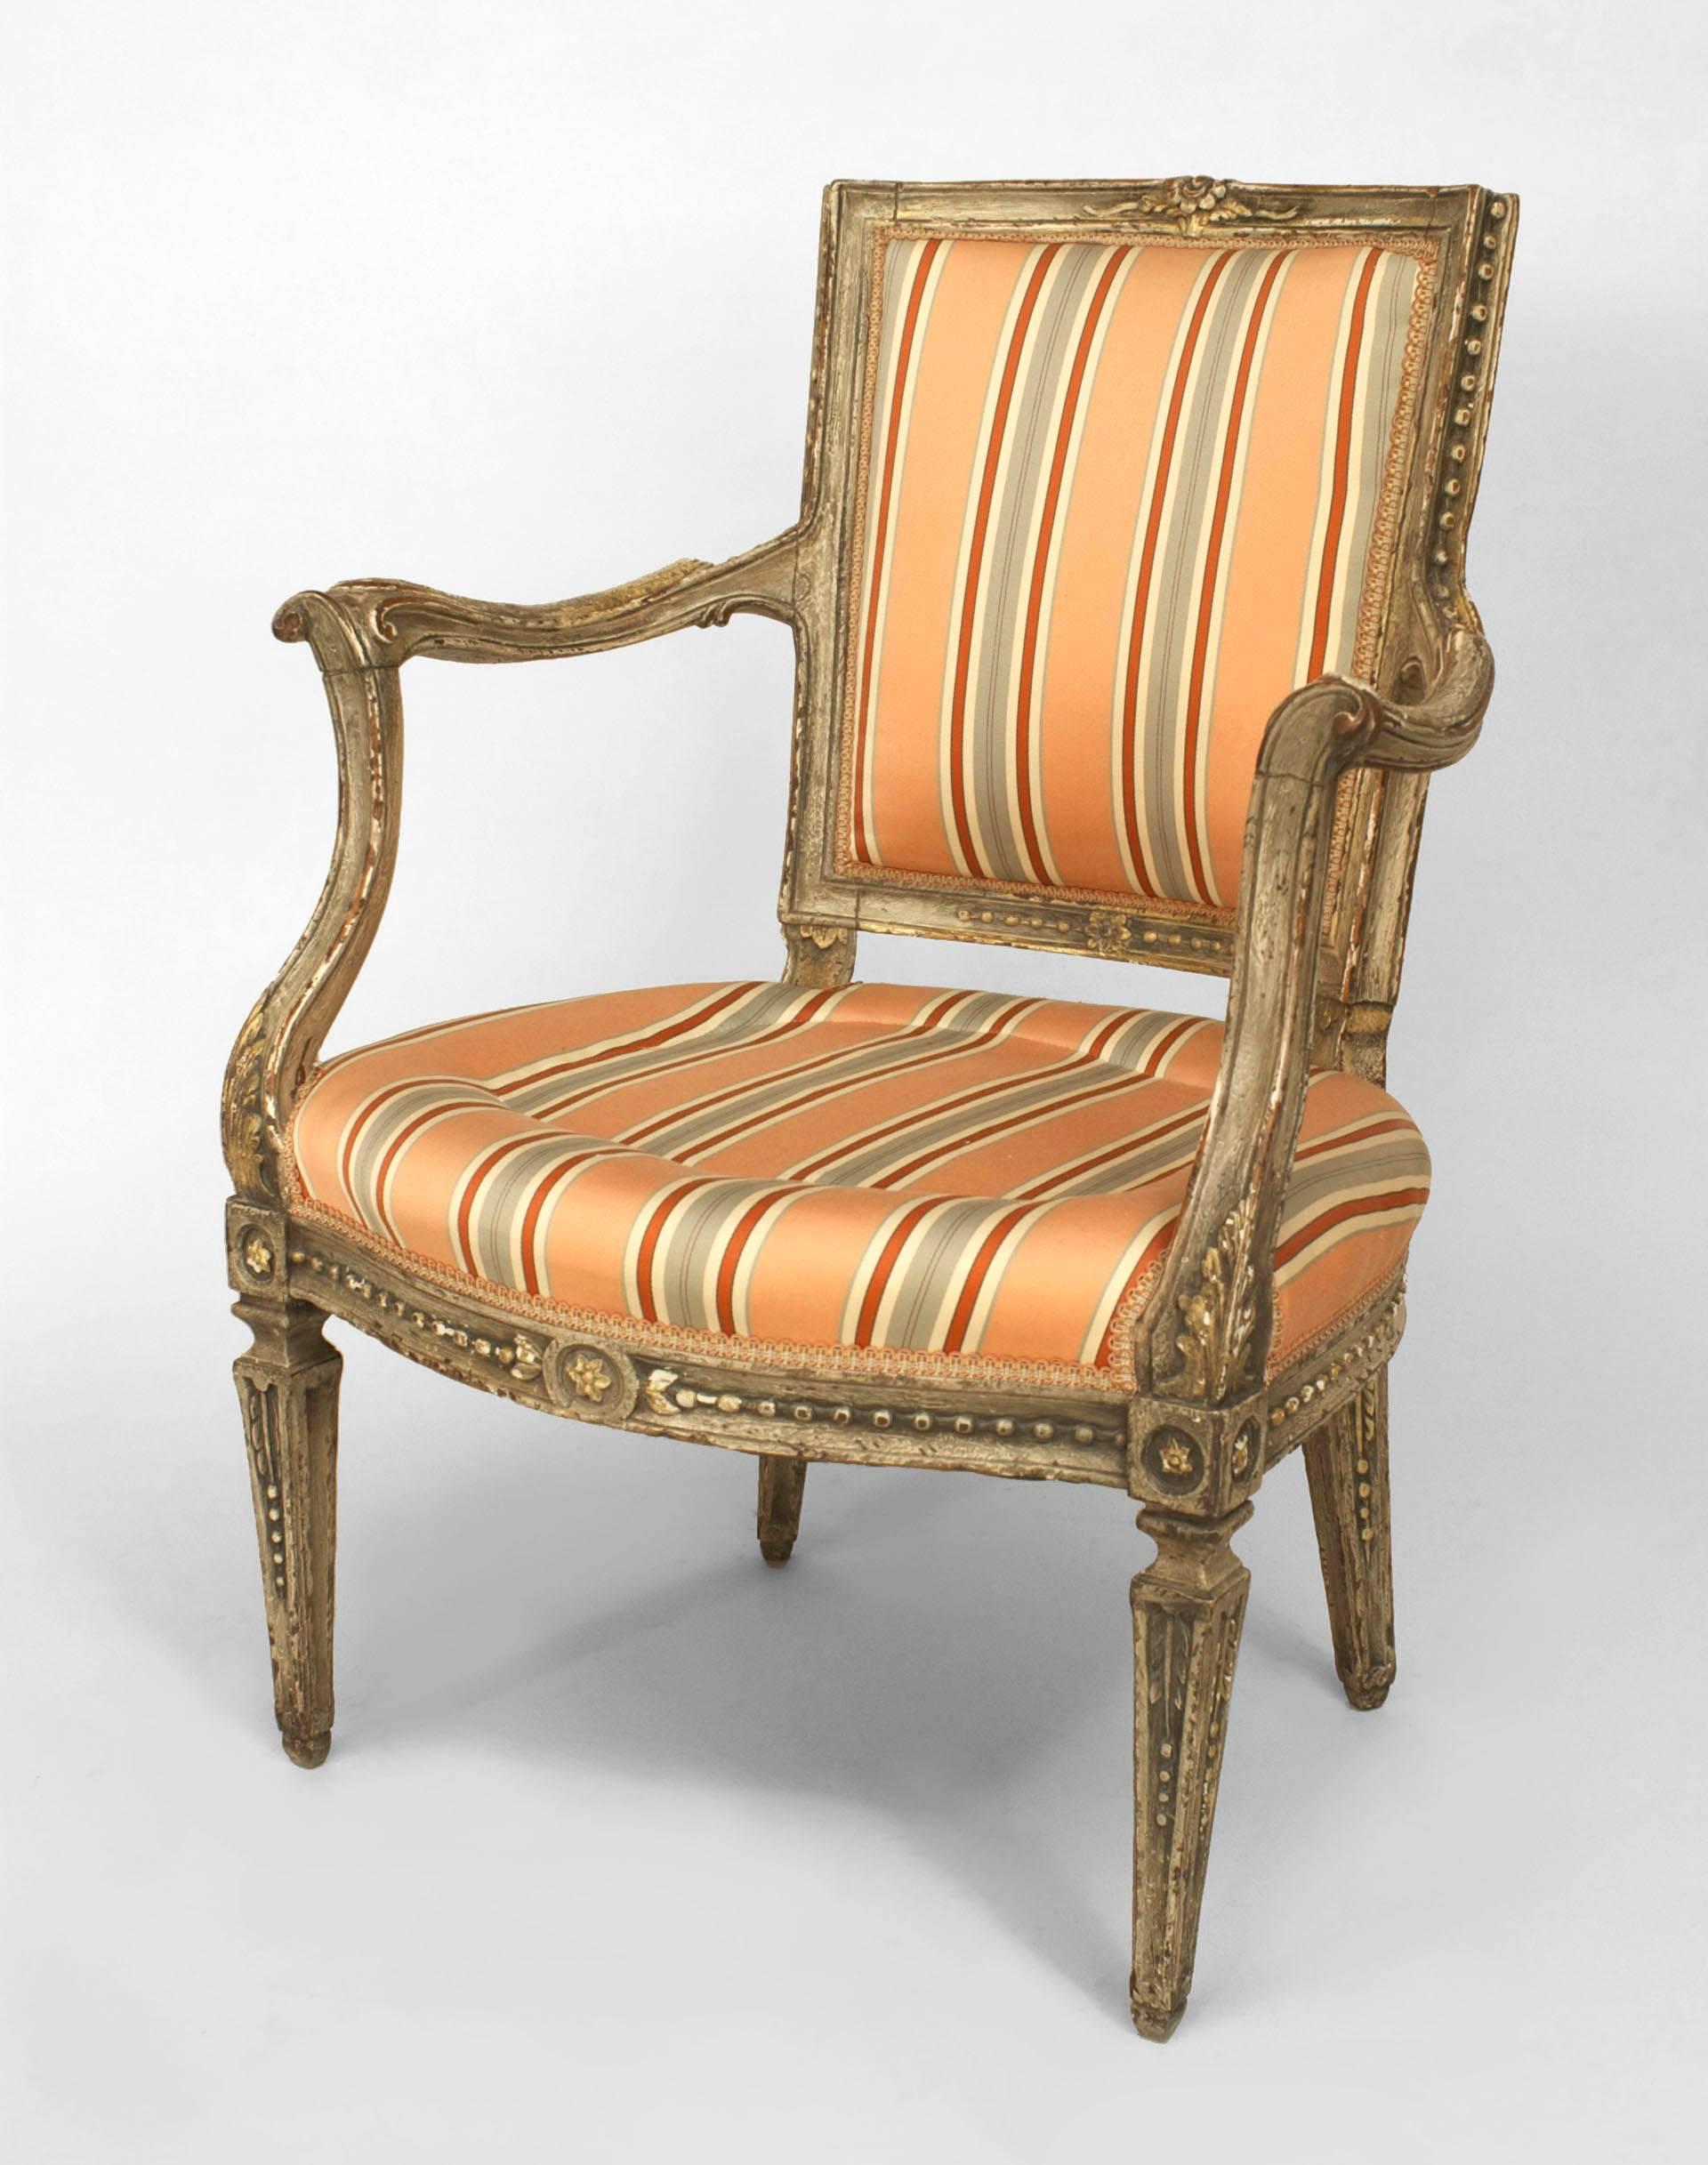 Italian Neo-classic (18th Cent) Piedmontese grey painted open arm chair with scroll carved arms and square tapered legs upholstered in pink stripe damask
